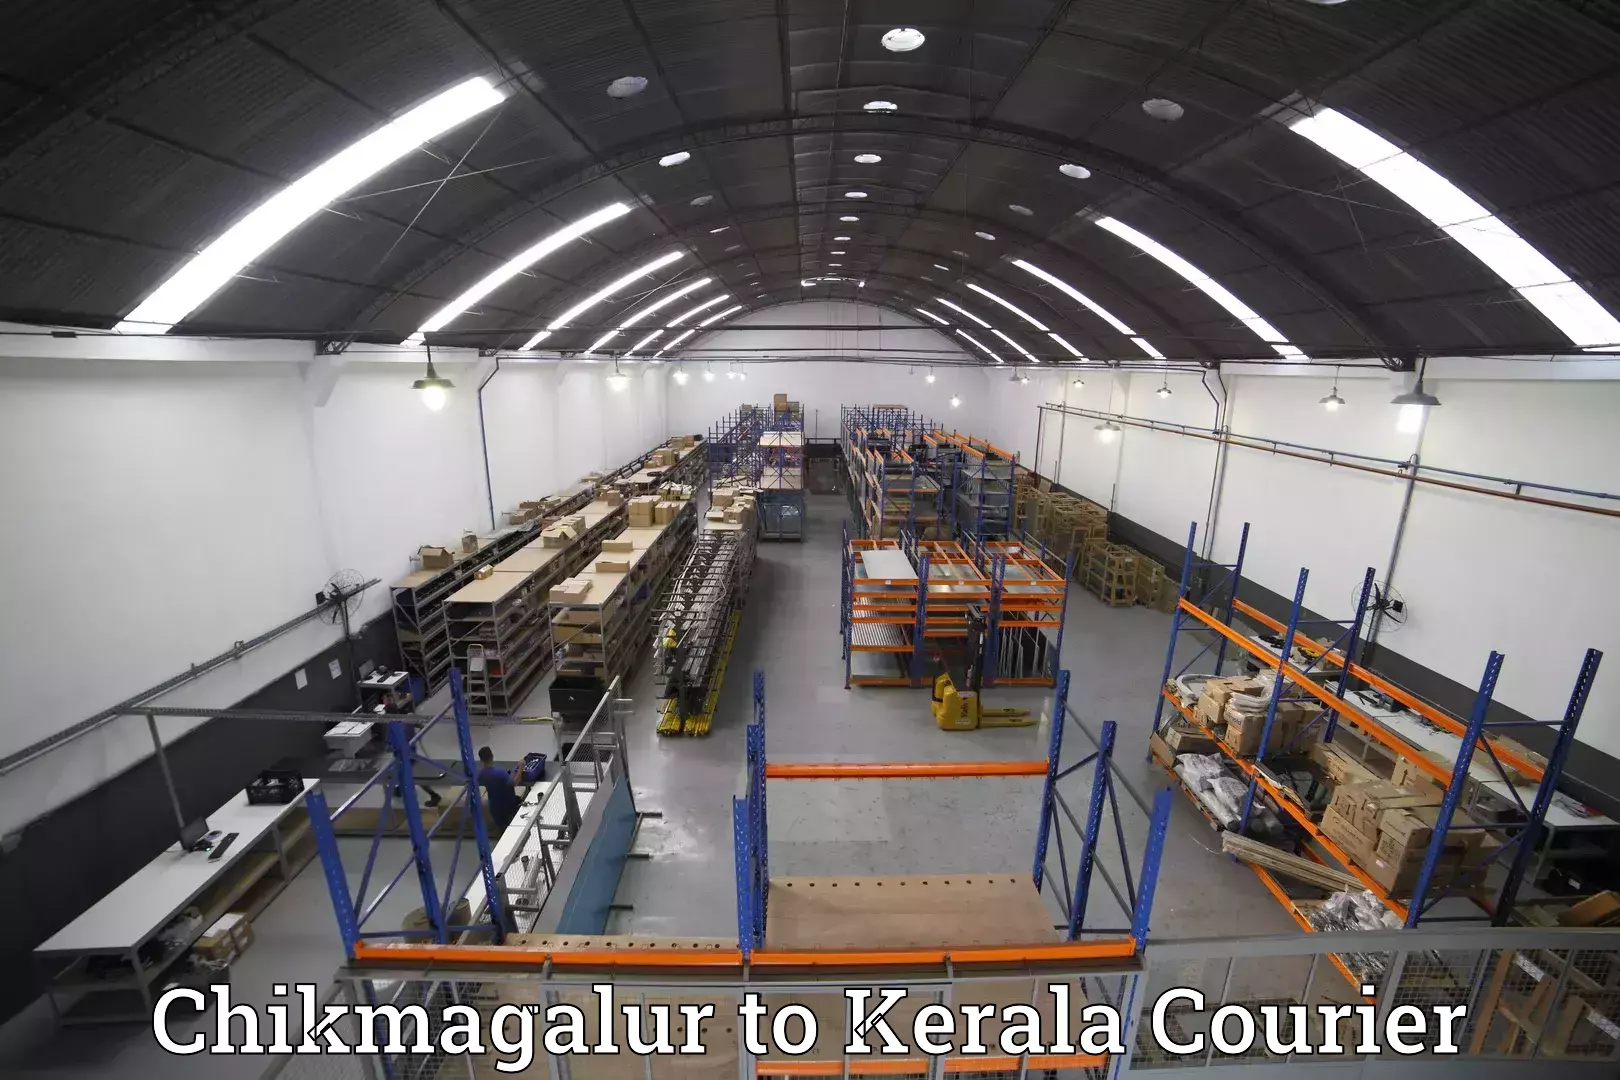 Luggage shipping specialists Chikmagalur to Kattappana